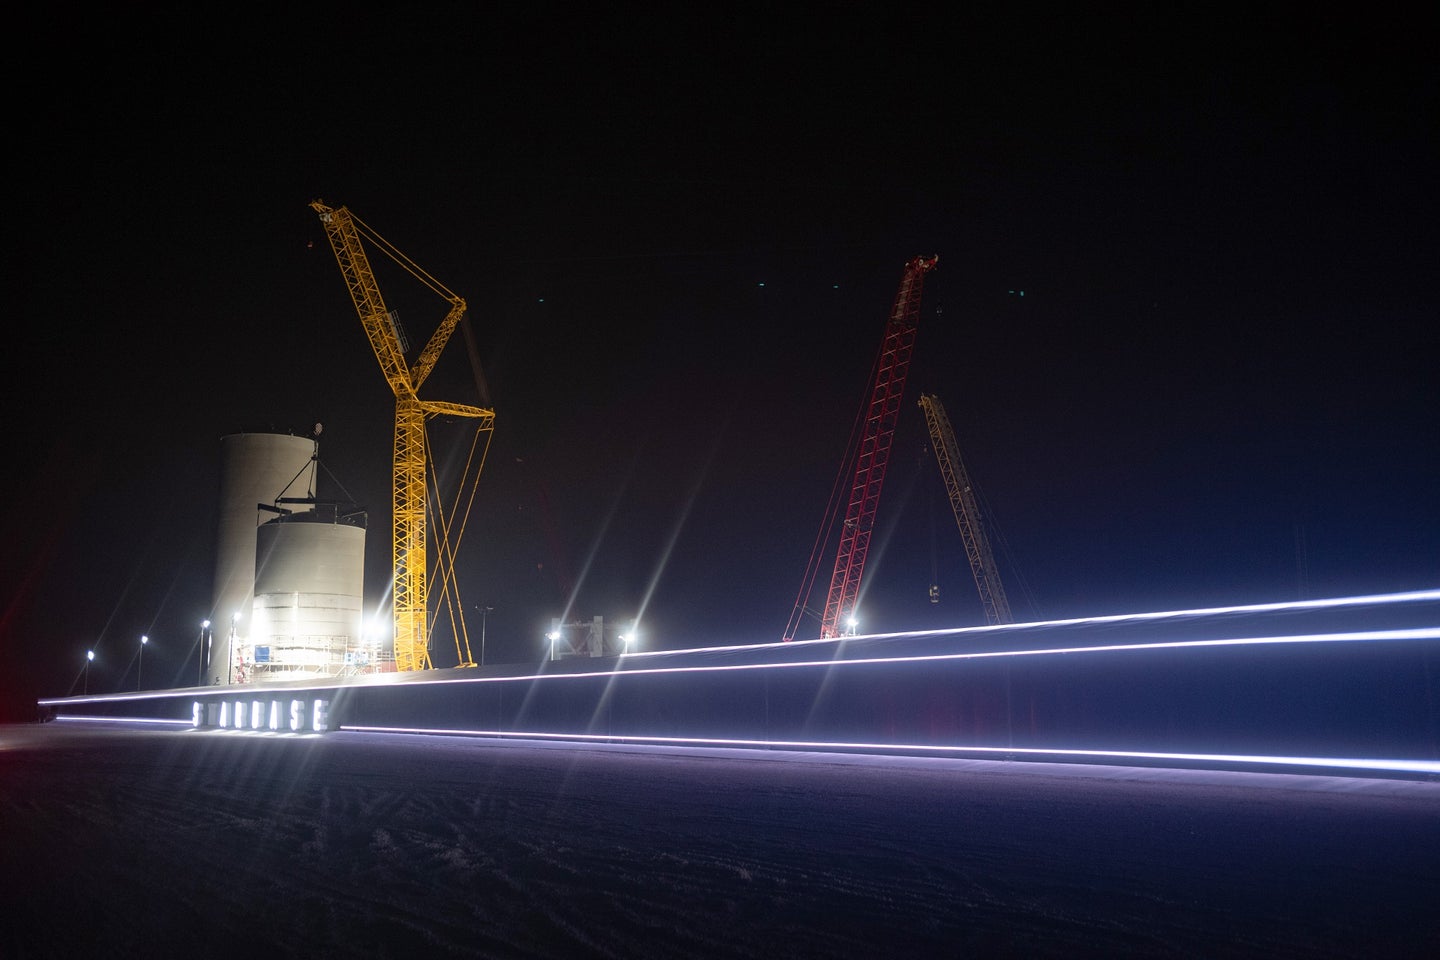 SpaceX flight center in Boca Chica, Texas, at night